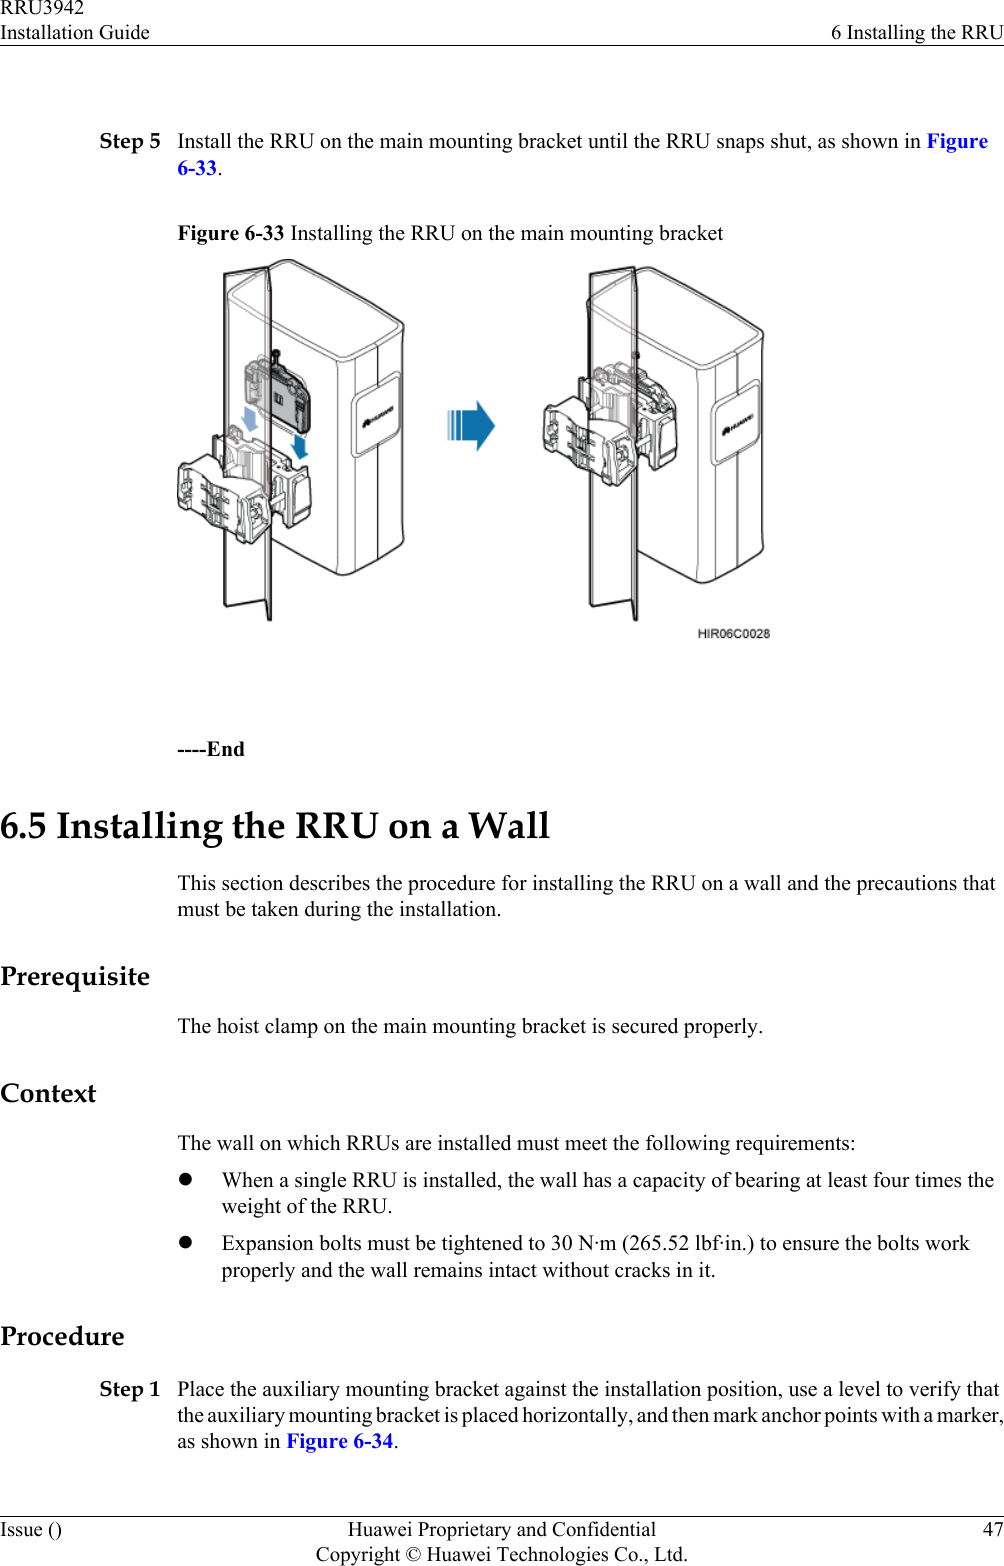  Step 5 Install the RRU on the main mounting bracket until the RRU snaps shut, as shown in Figure6-33.Figure 6-33 Installing the RRU on the main mounting bracket ----End6.5 Installing the RRU on a WallThis section describes the procedure for installing the RRU on a wall and the precautions thatmust be taken during the installation.PrerequisiteThe hoist clamp on the main mounting bracket is secured properly.ContextThe wall on which RRUs are installed must meet the following requirements:lWhen a single RRU is installed, the wall has a capacity of bearing at least four times theweight of the RRU.lExpansion bolts must be tightened to 30 N·m (265.52 lbf·in.) to ensure the bolts workproperly and the wall remains intact without cracks in it.ProcedureStep 1 Place the auxiliary mounting bracket against the installation position, use a level to verify thatthe auxiliary mounting bracket is placed horizontally, and then mark anchor points with a marker,as shown in Figure 6-34.RRU3942Installation Guide 6 Installing the RRUIssue () Huawei Proprietary and ConfidentialCopyright © Huawei Technologies Co., Ltd.47